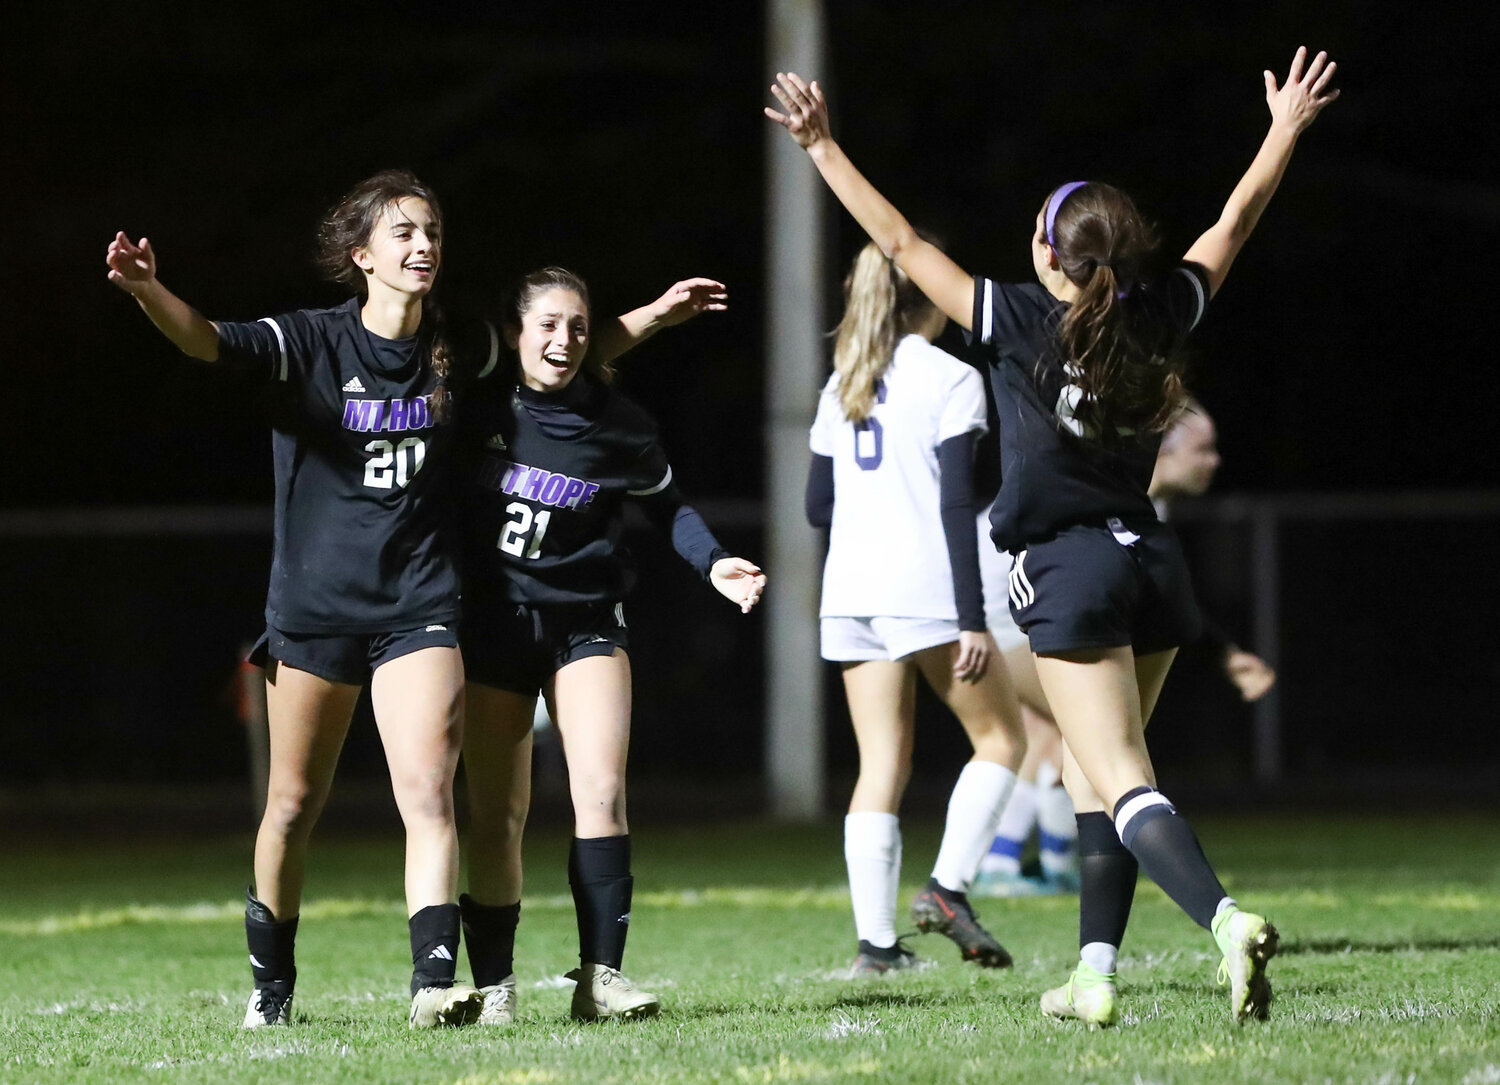 Thea Jackson (left) Lilliana Redman and a teammate celebrate after Jackson scored one of her three goals in the Huskies' 4-0 win over South Kingstown in the D-I quarterfinals on Friday.